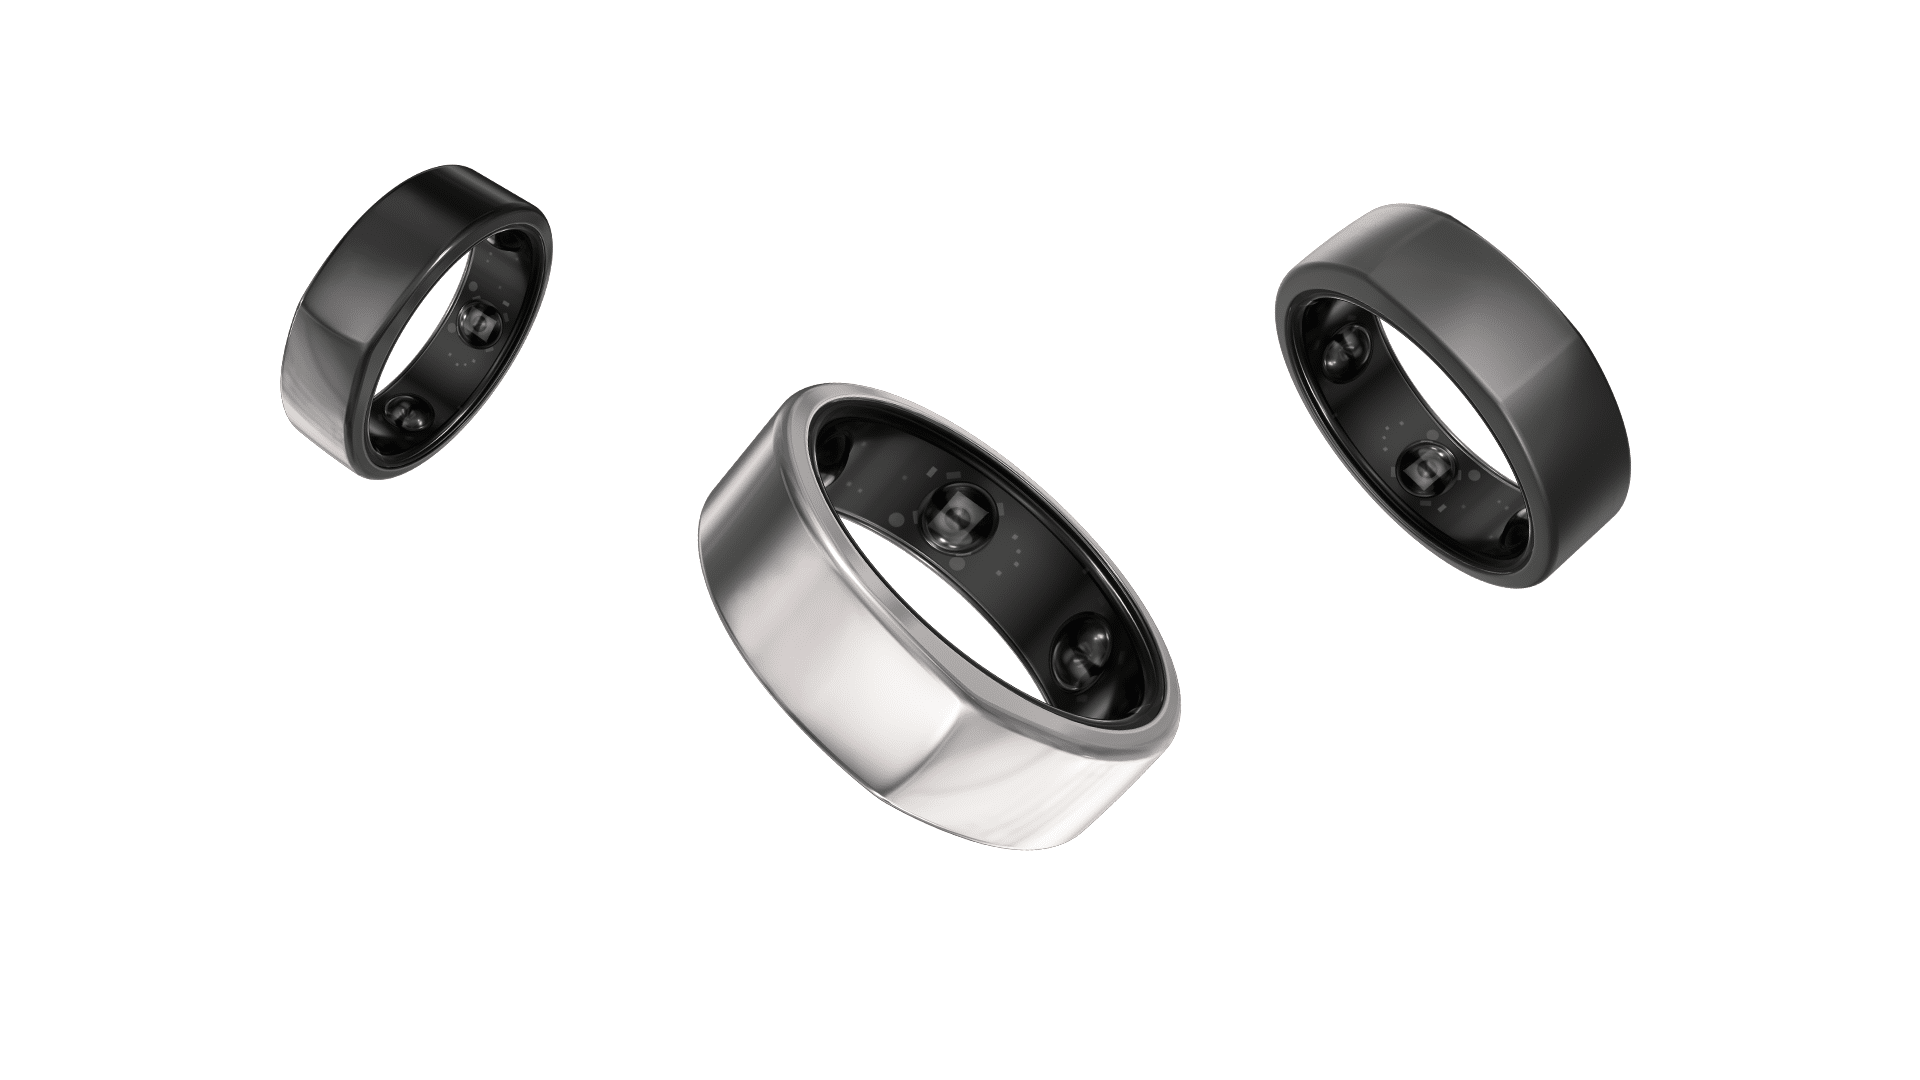 Oura ring - different colors